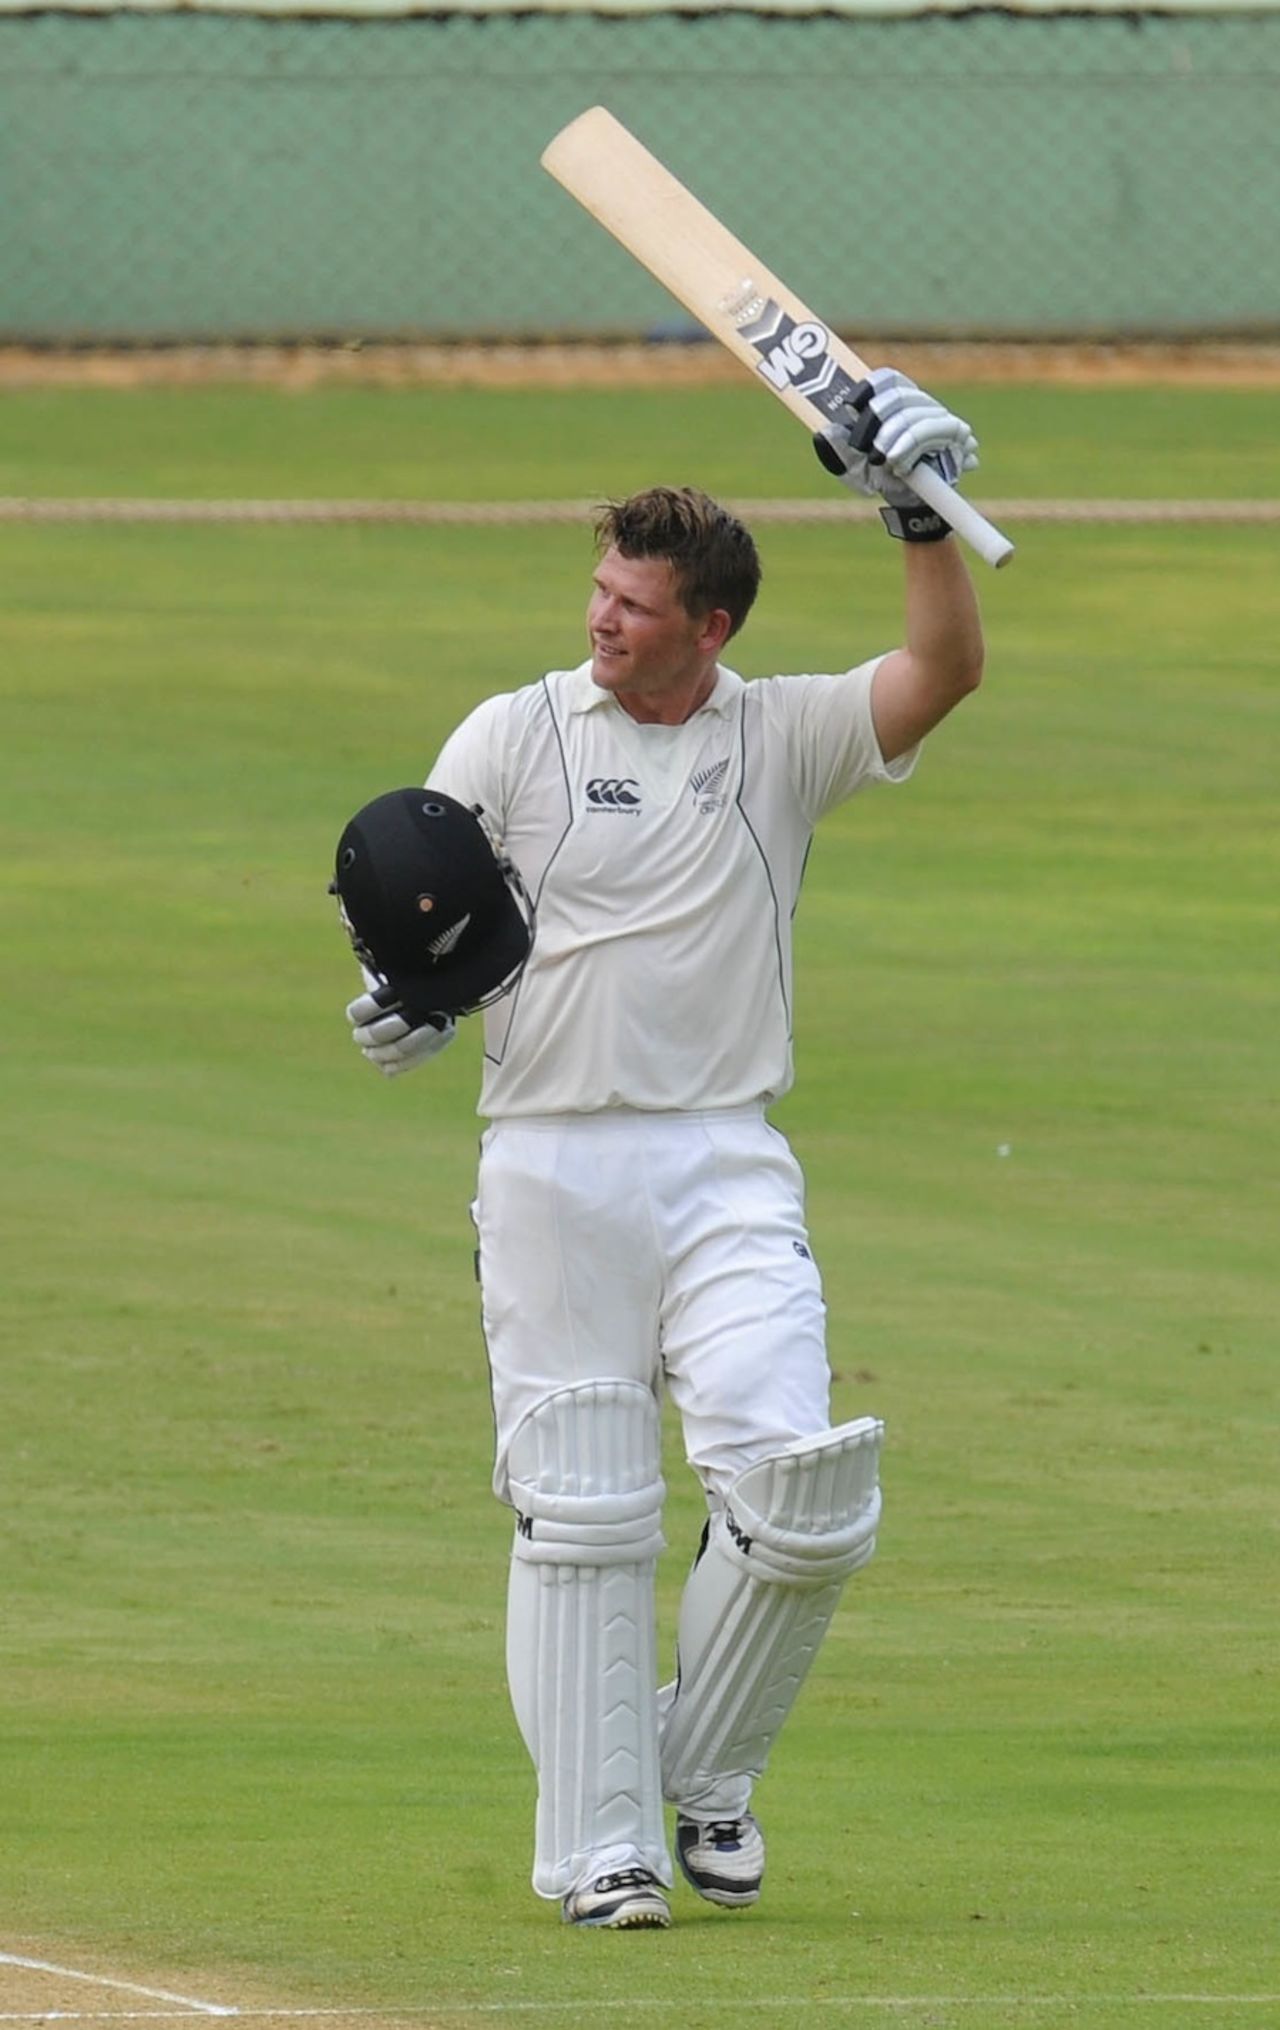 Corey Anderson's knock of 100 included 18 boundaries, India A v New Zealand A, 2nd unofficial Test, Visakhapatnam, Sep 2, 2013